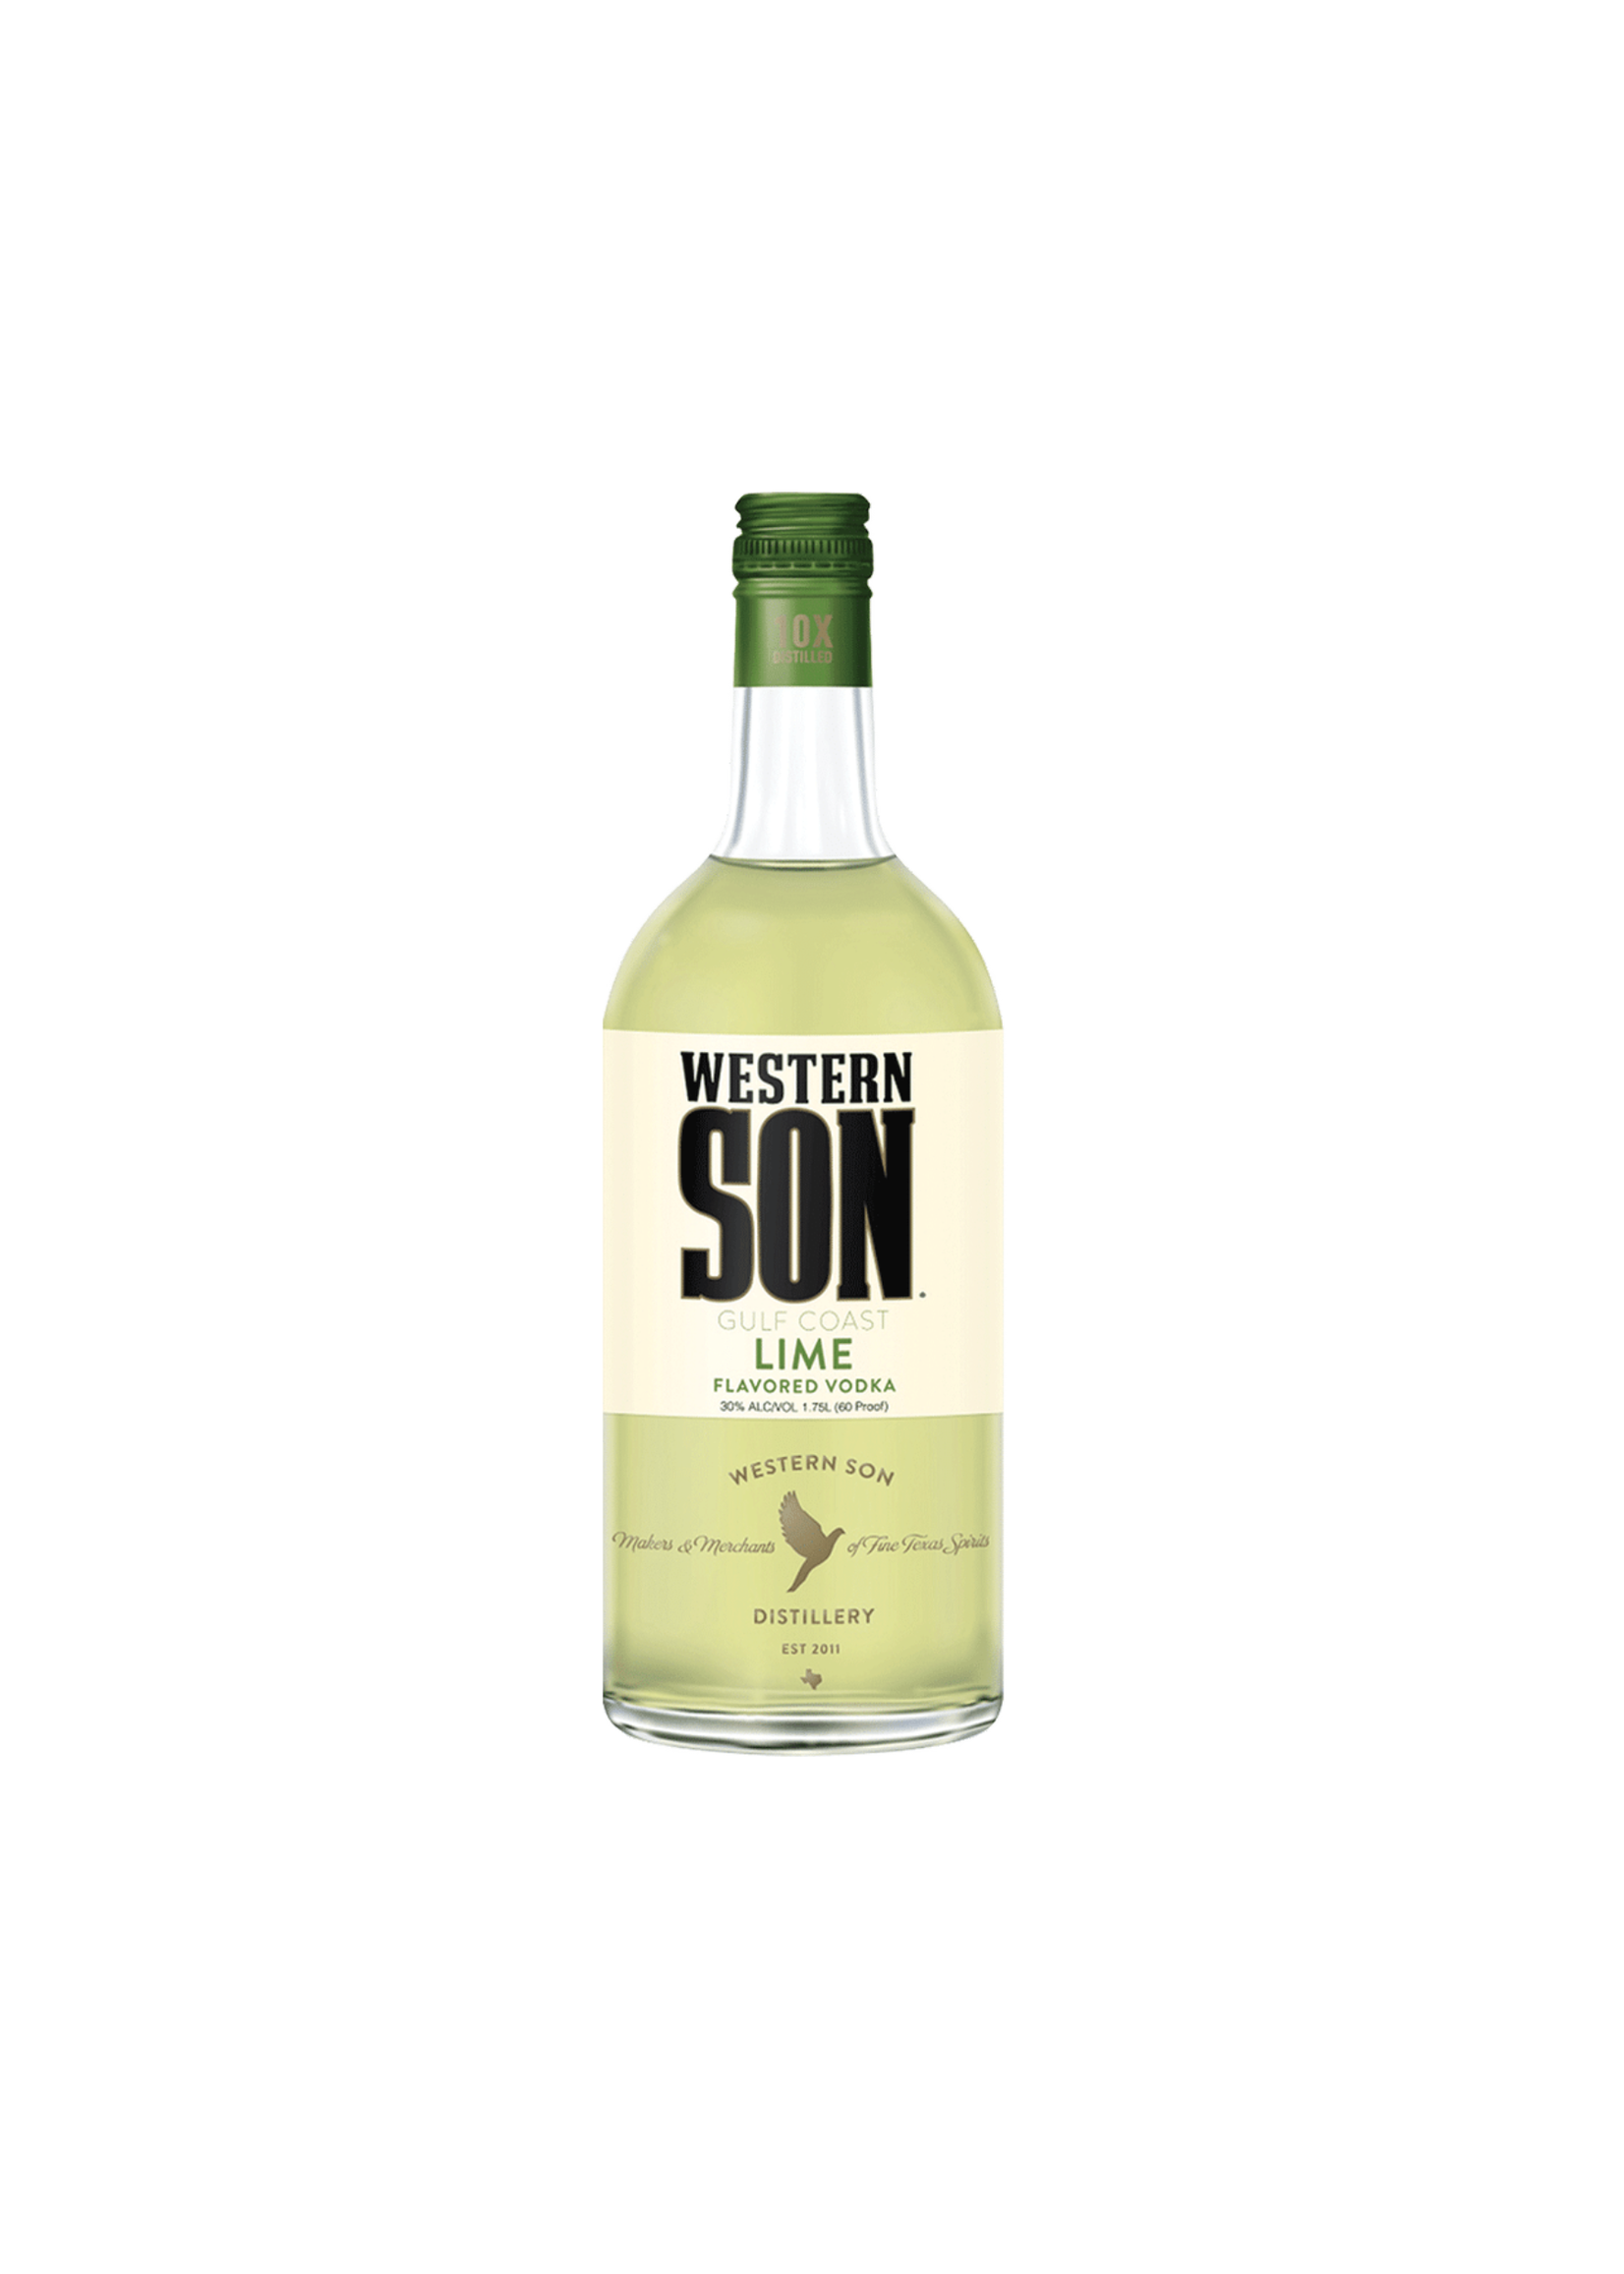 Western Son Western Son Lime Flavored Vodka 60Proof 1.75 Ltr